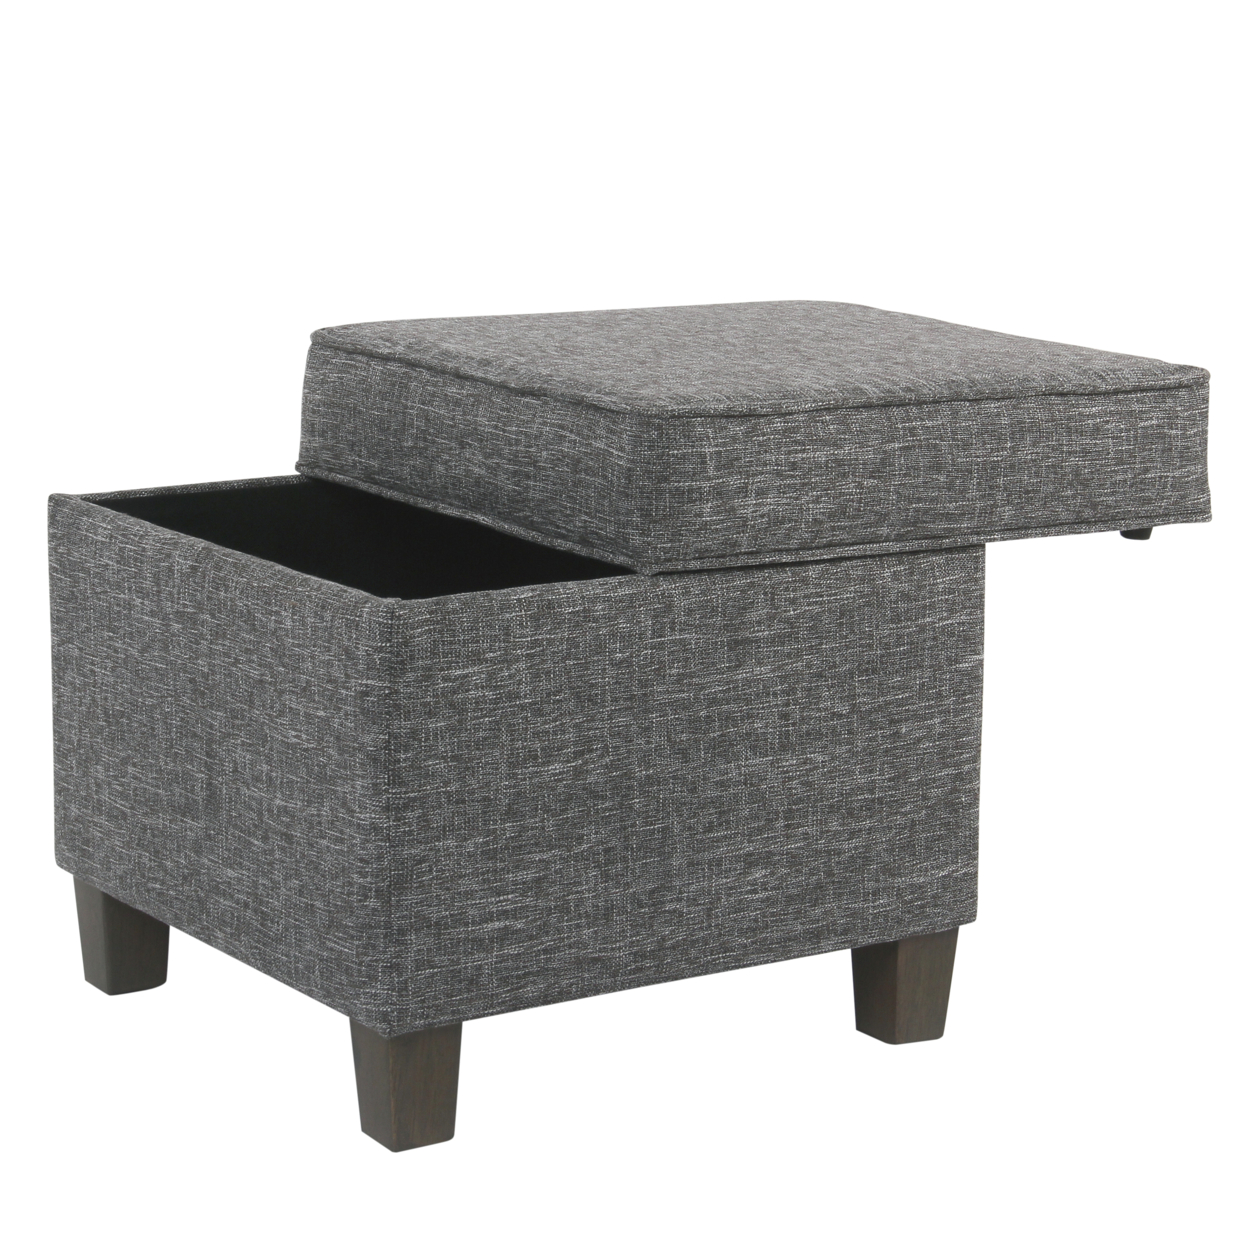 Textured Fabric Upholstered Wooden Ottoman With Lift Off Top, Gray And Brown- Saltoro Sherpi